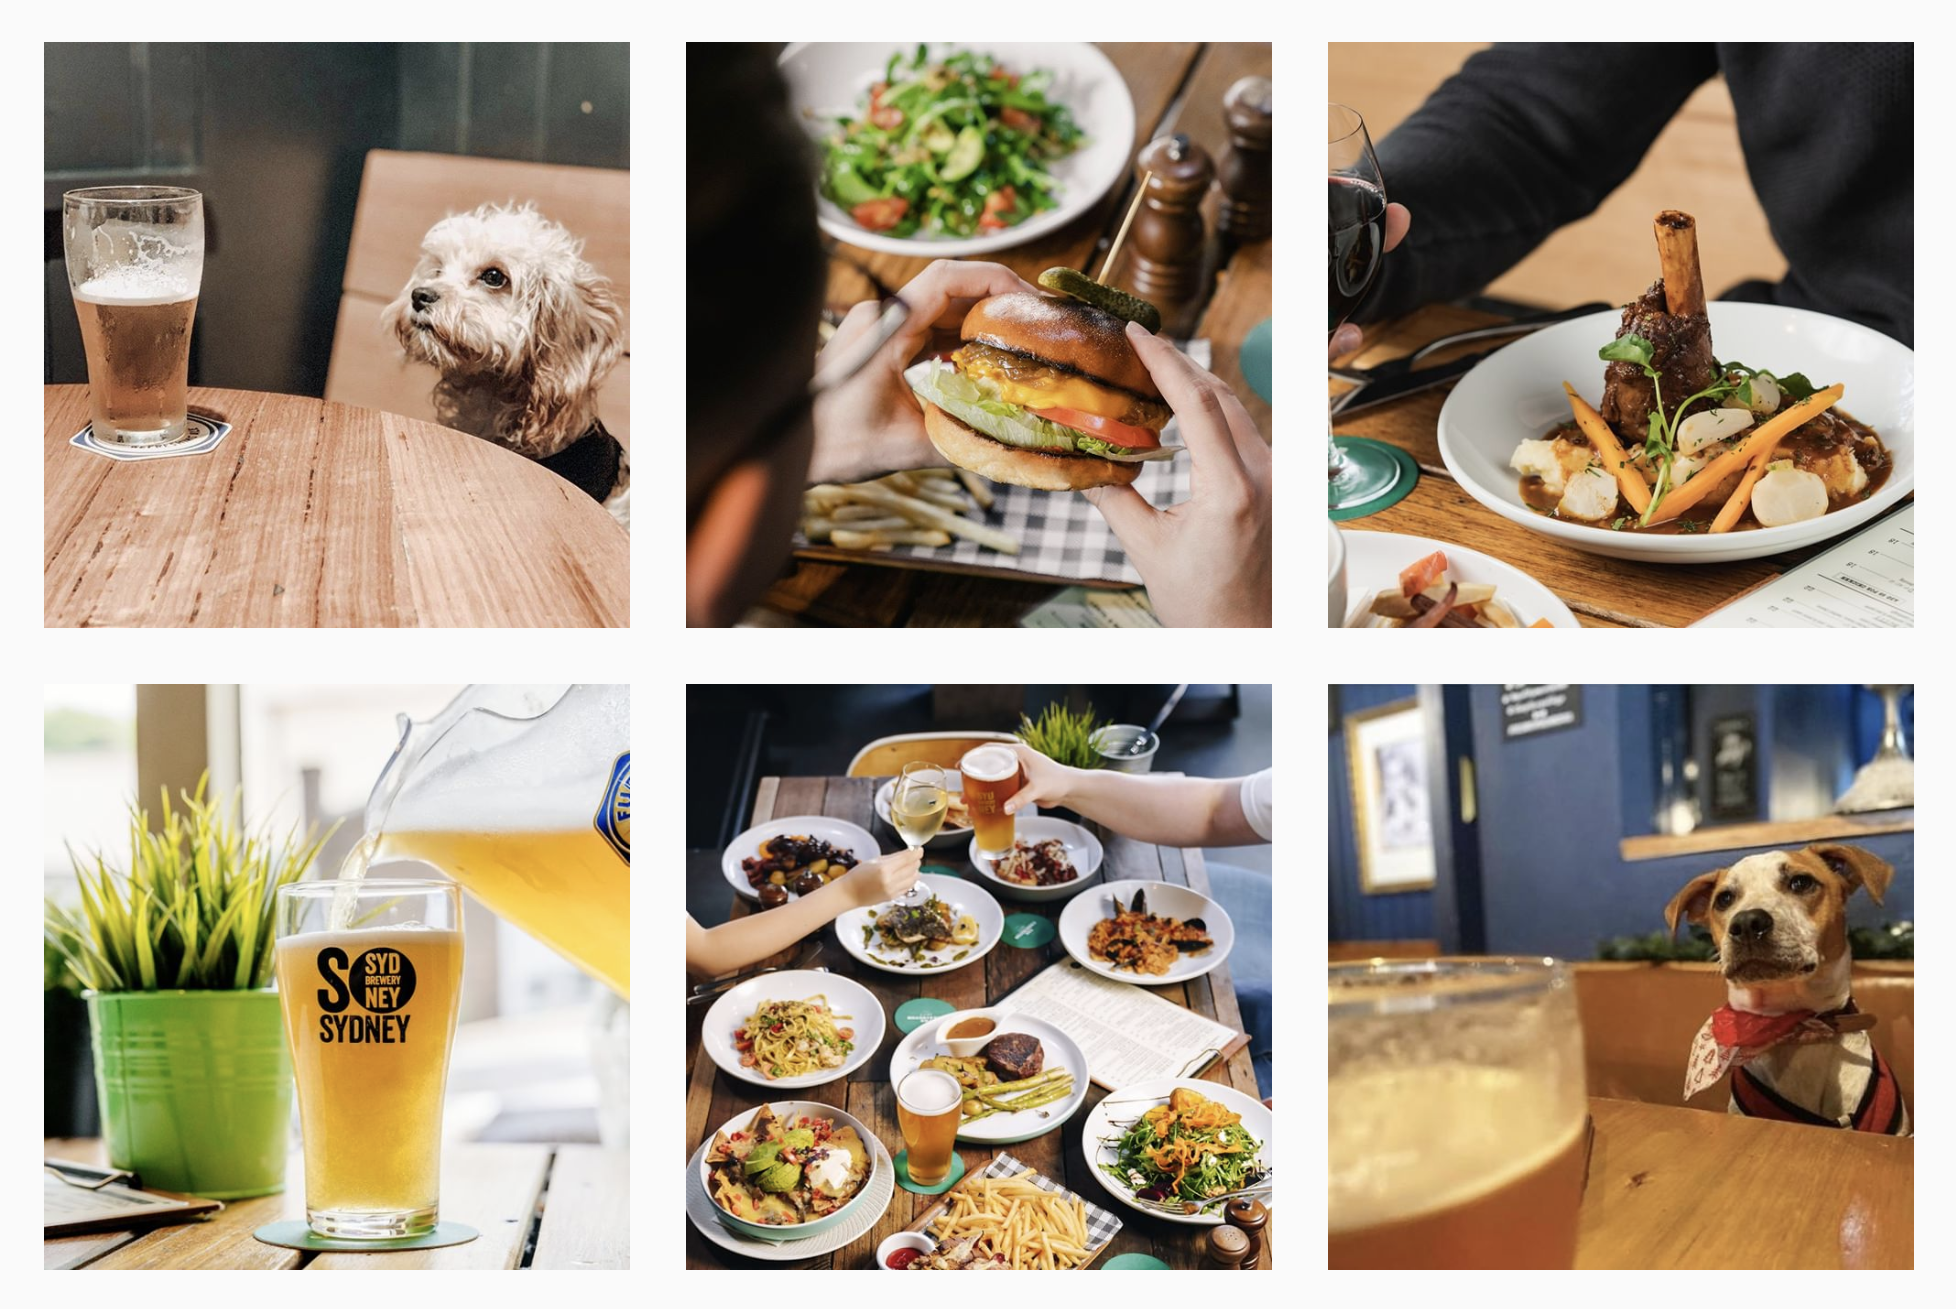 Instagram feed of The Carrington Sydney, showing photos of food, drinks and dogs in venue